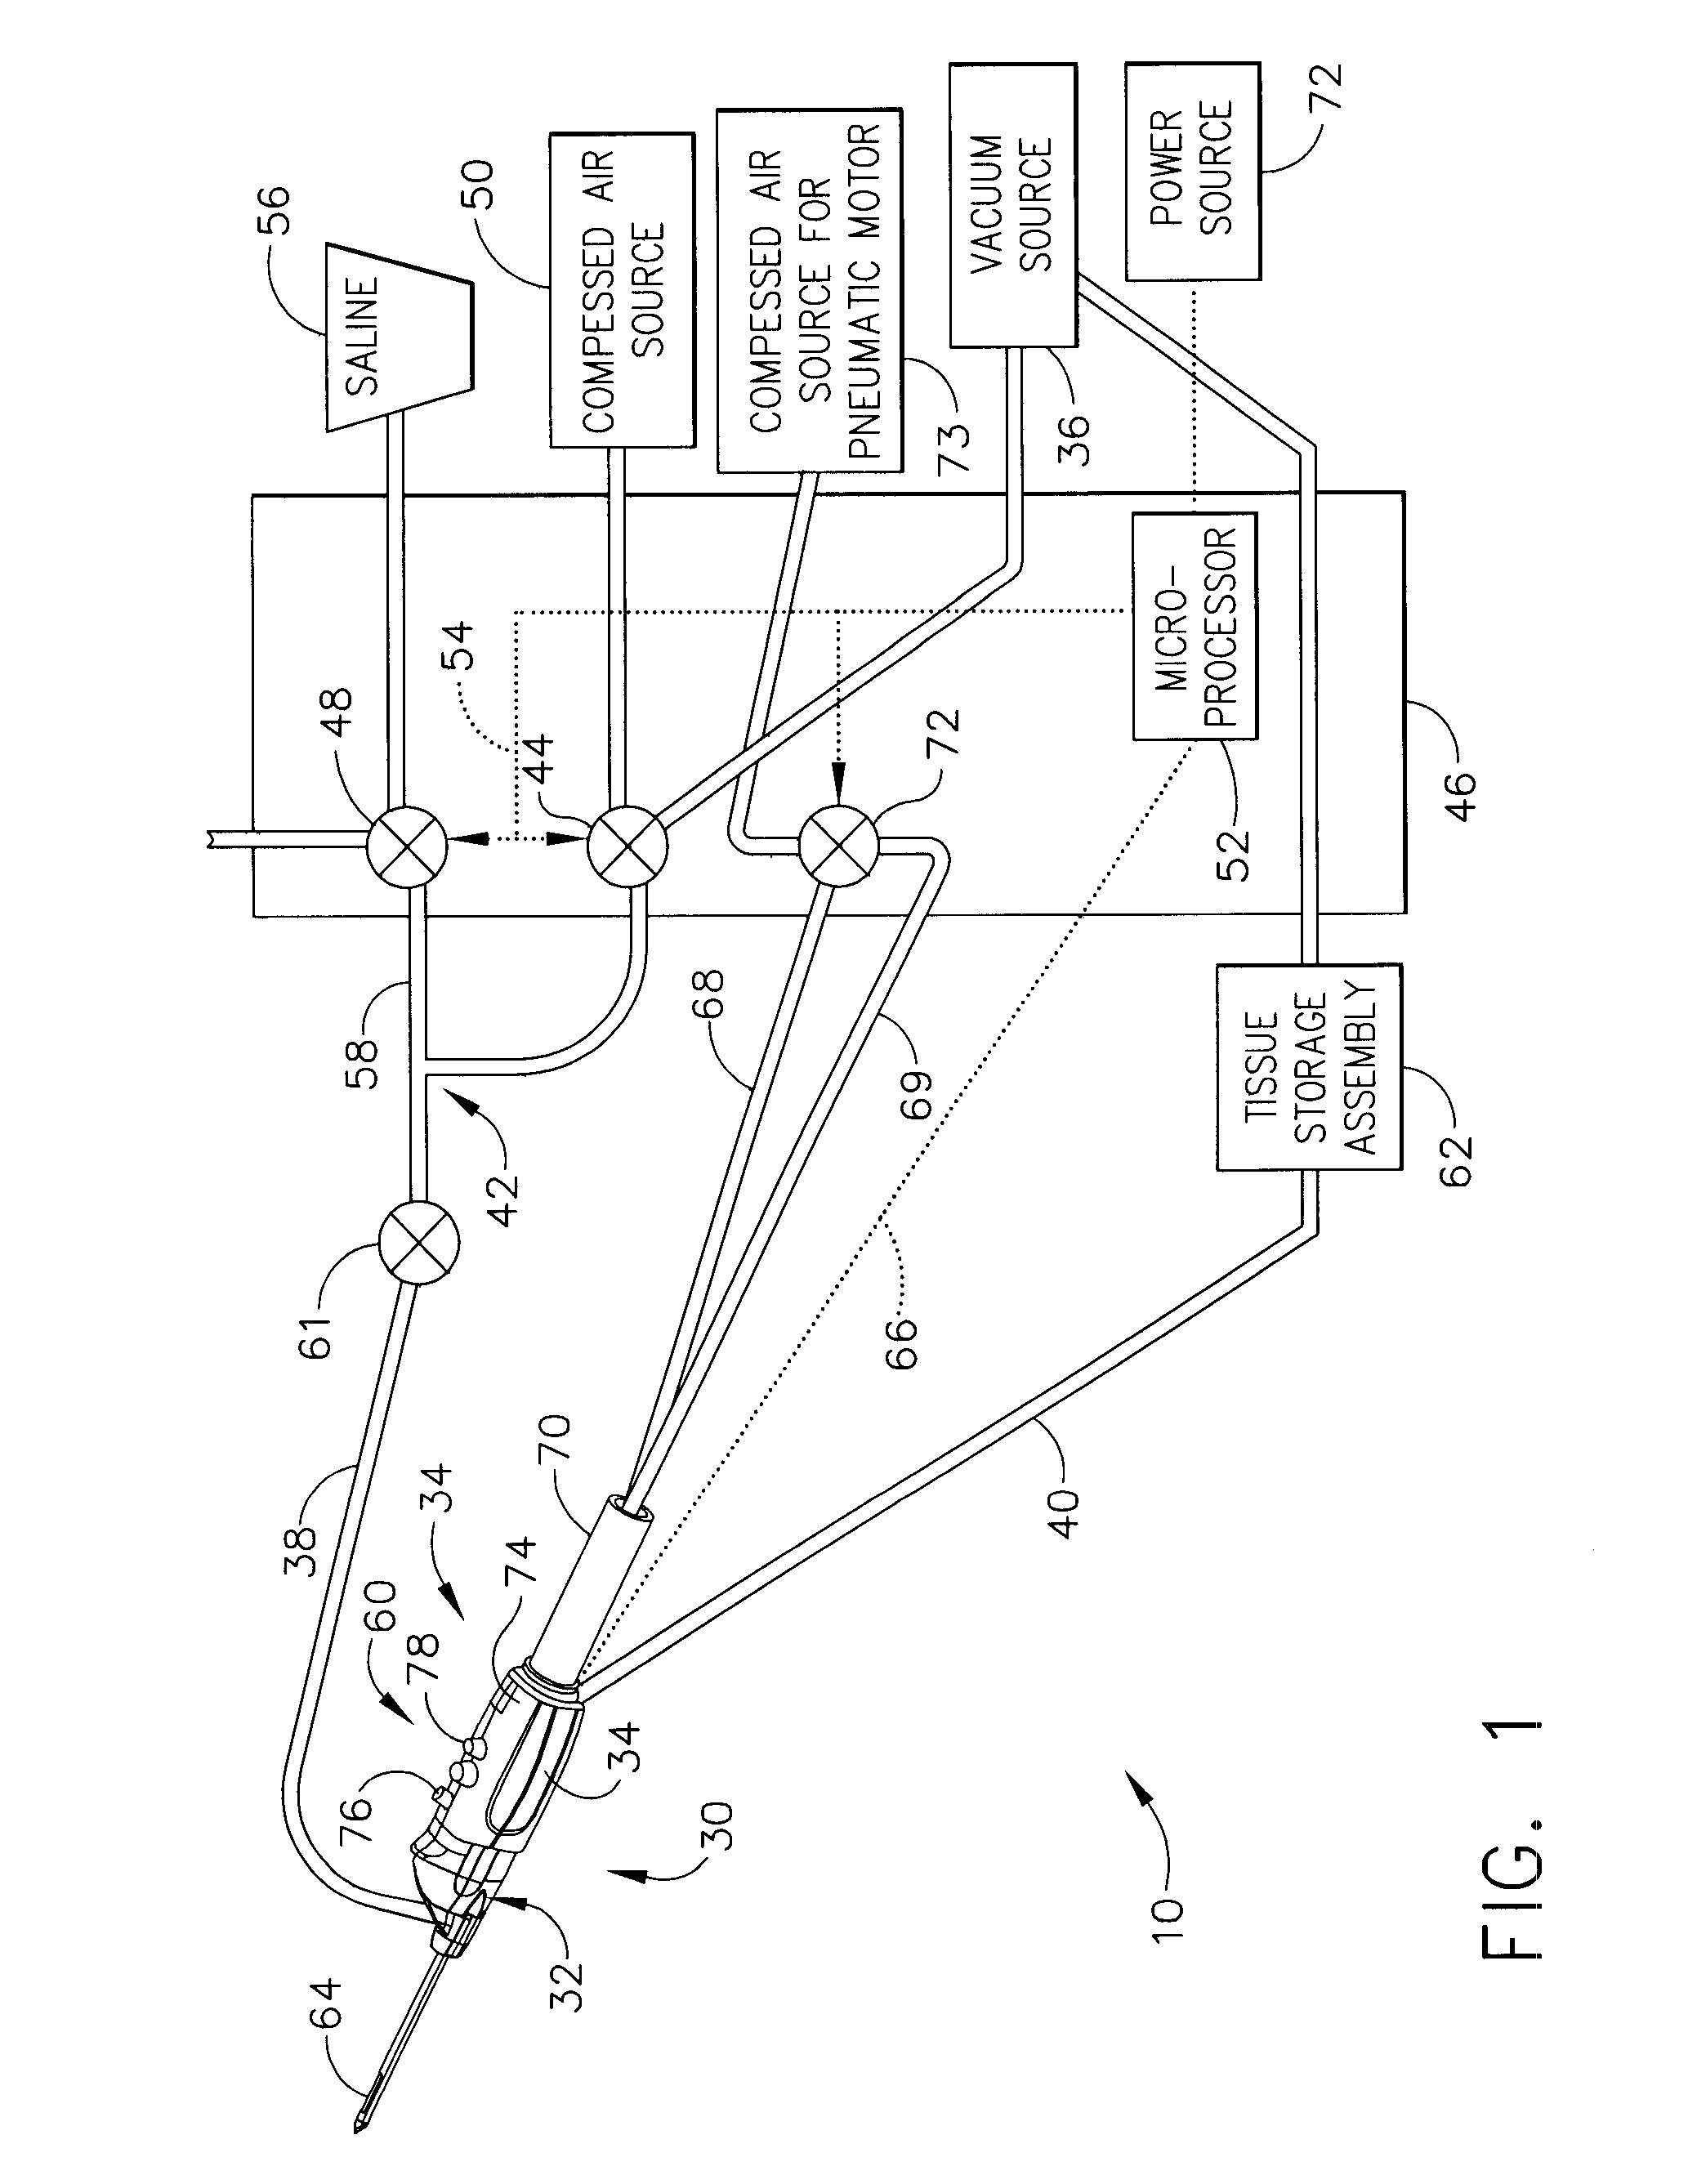 Core sampling biopsy device with short coupled MRI-compatible driver